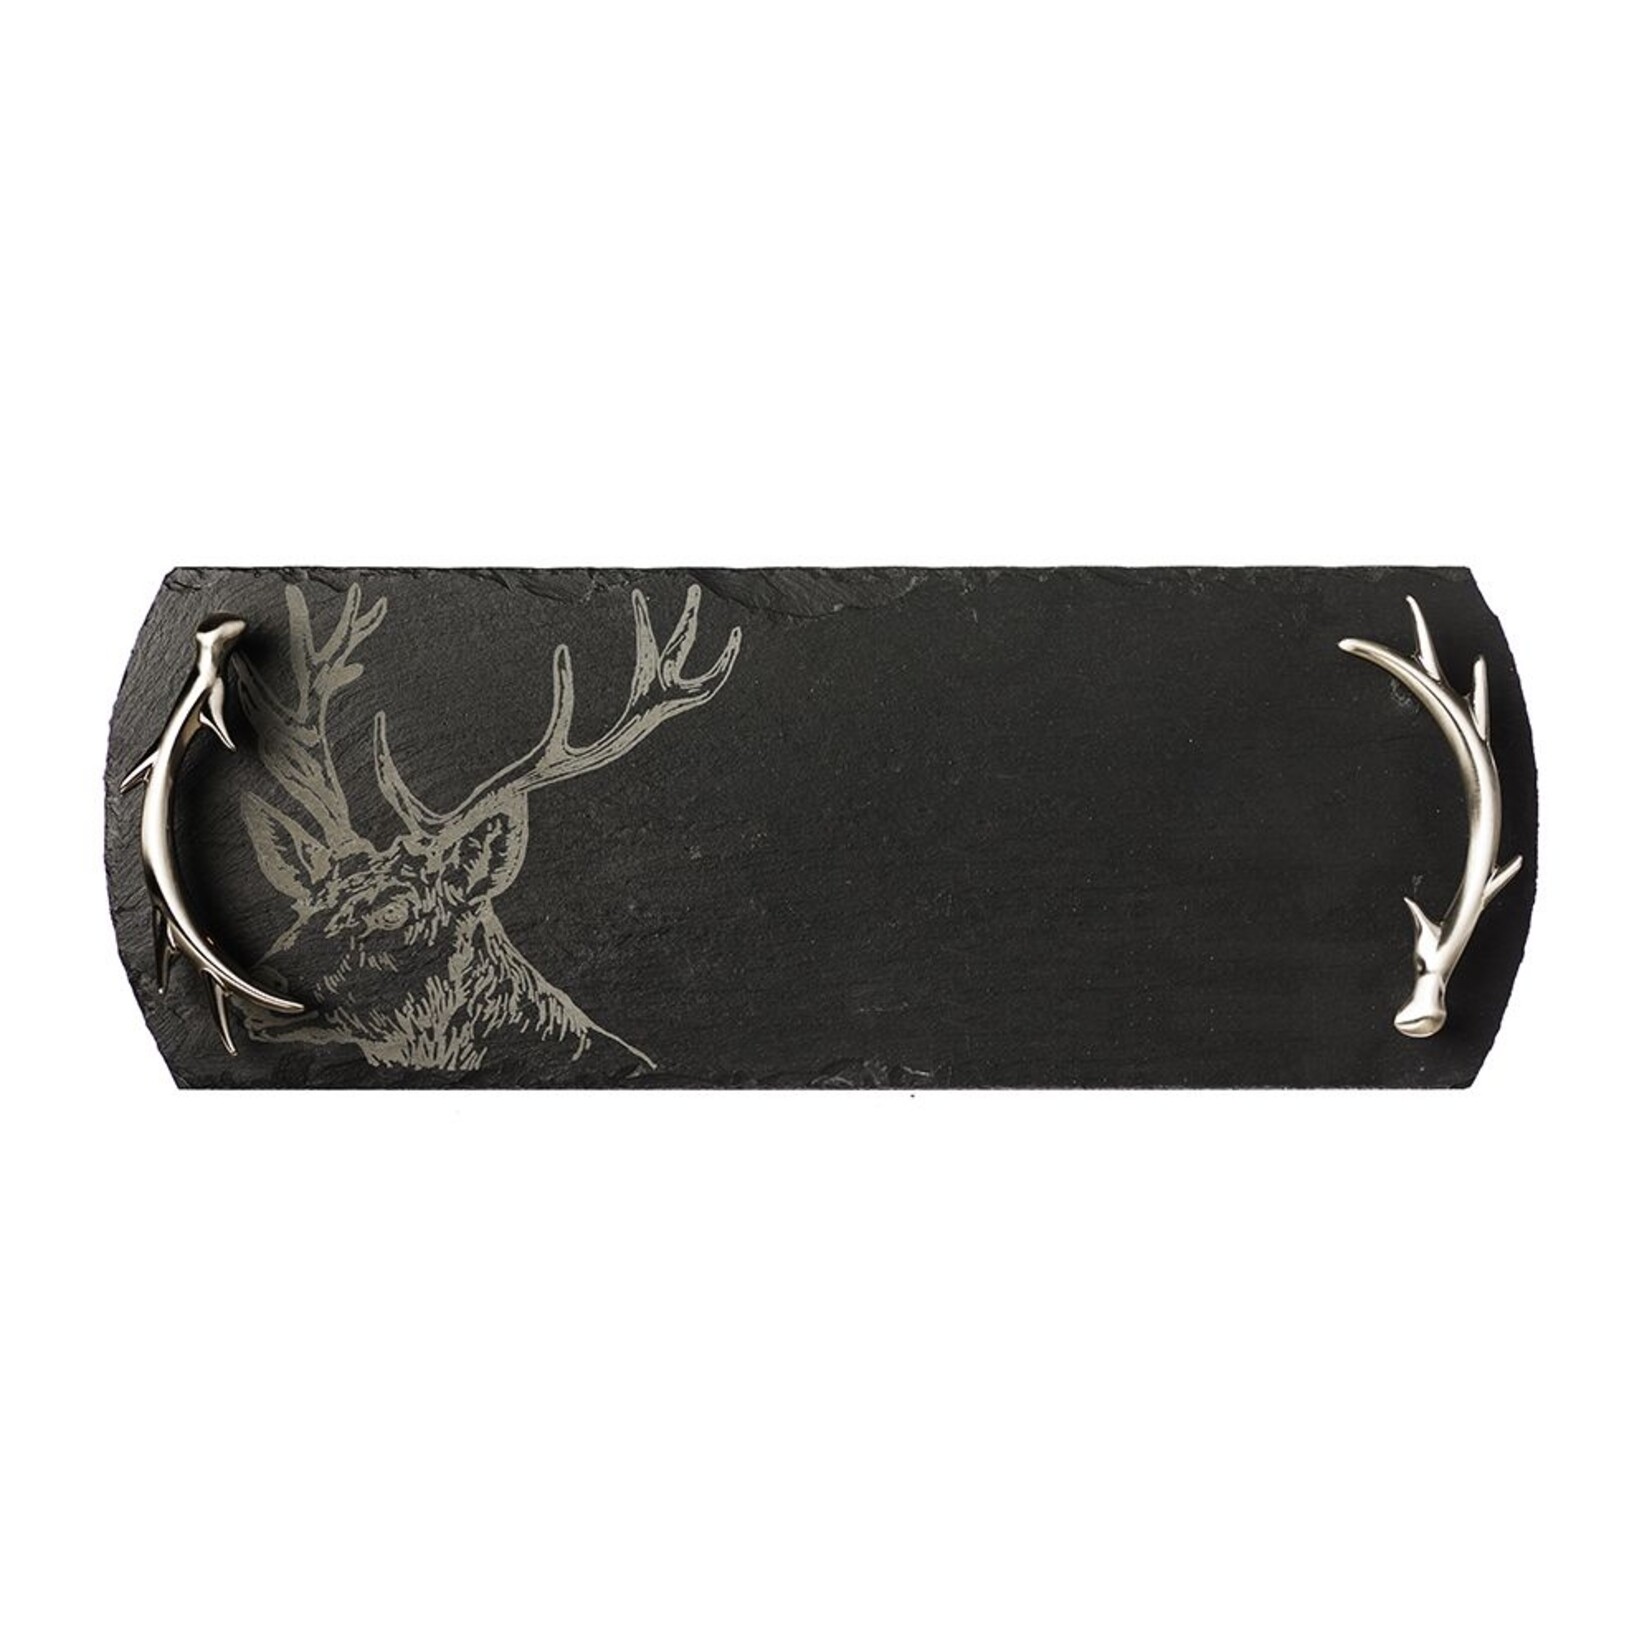 Selbrae House Slate Serving Tray Gift Set - Stag